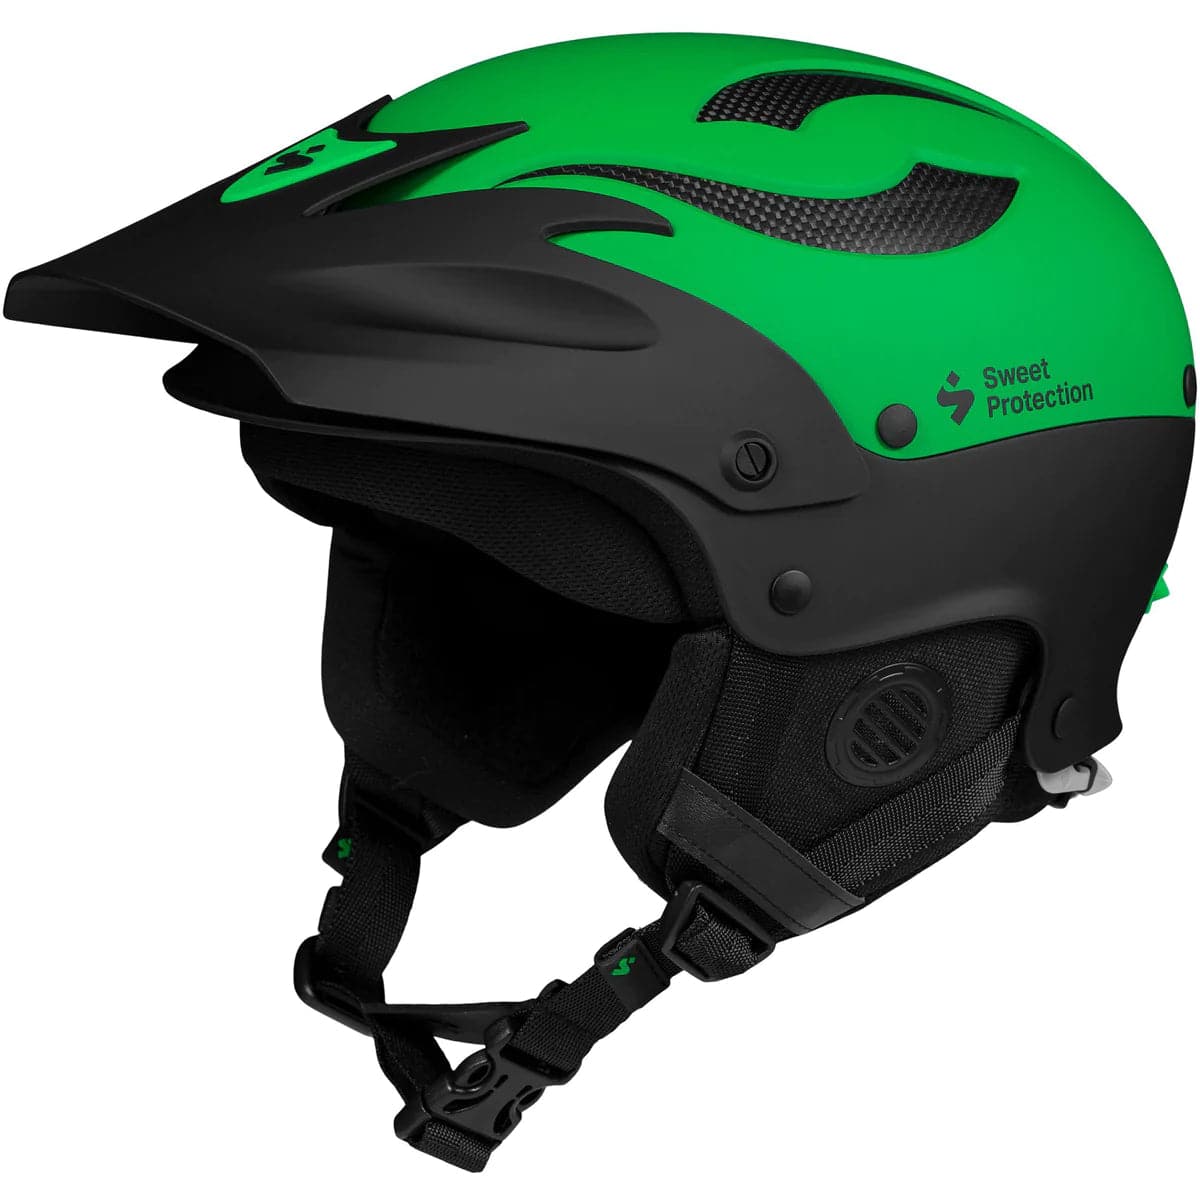 Featuring the Rocker Helmet helmet manufactured by Sweet shown here from one angle.